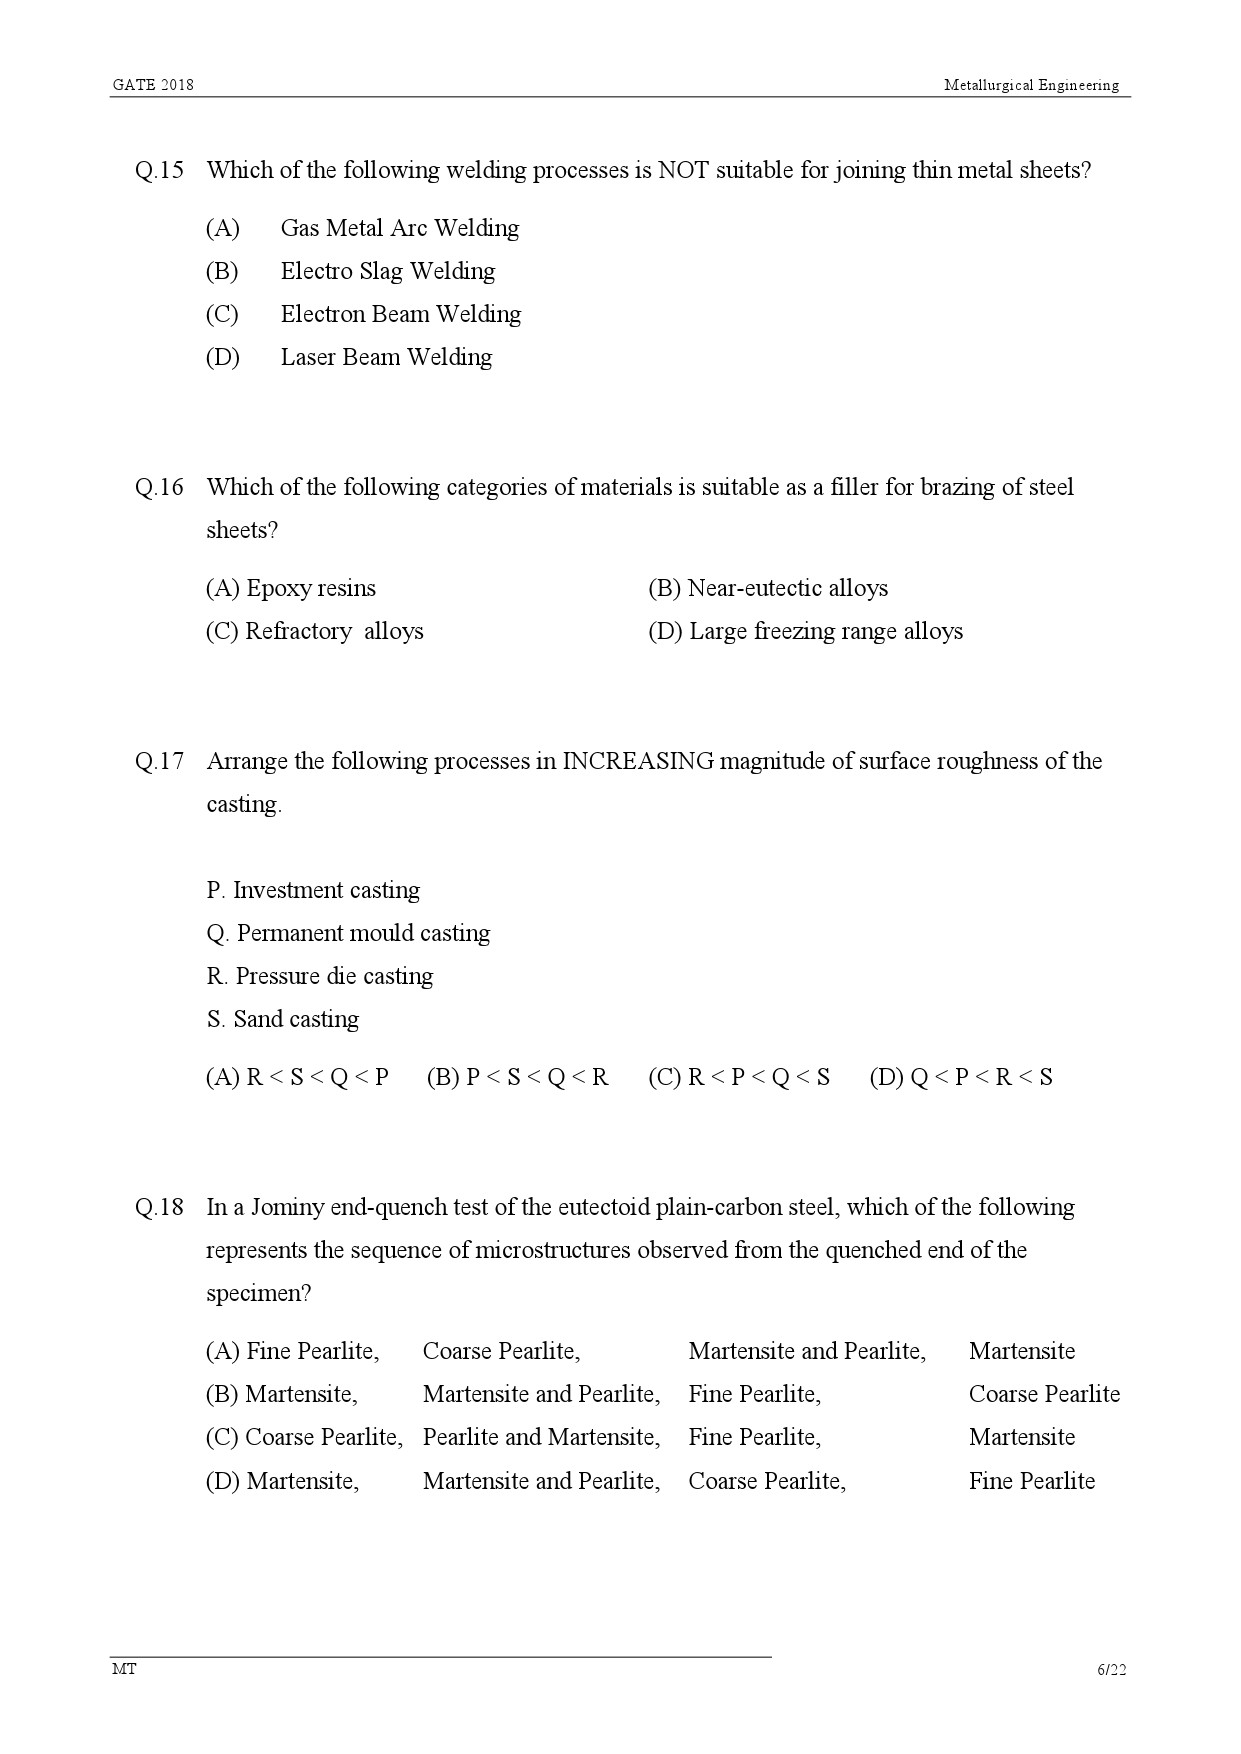 GATE Exam Question Paper 2018 Metallurgical Engineering 8